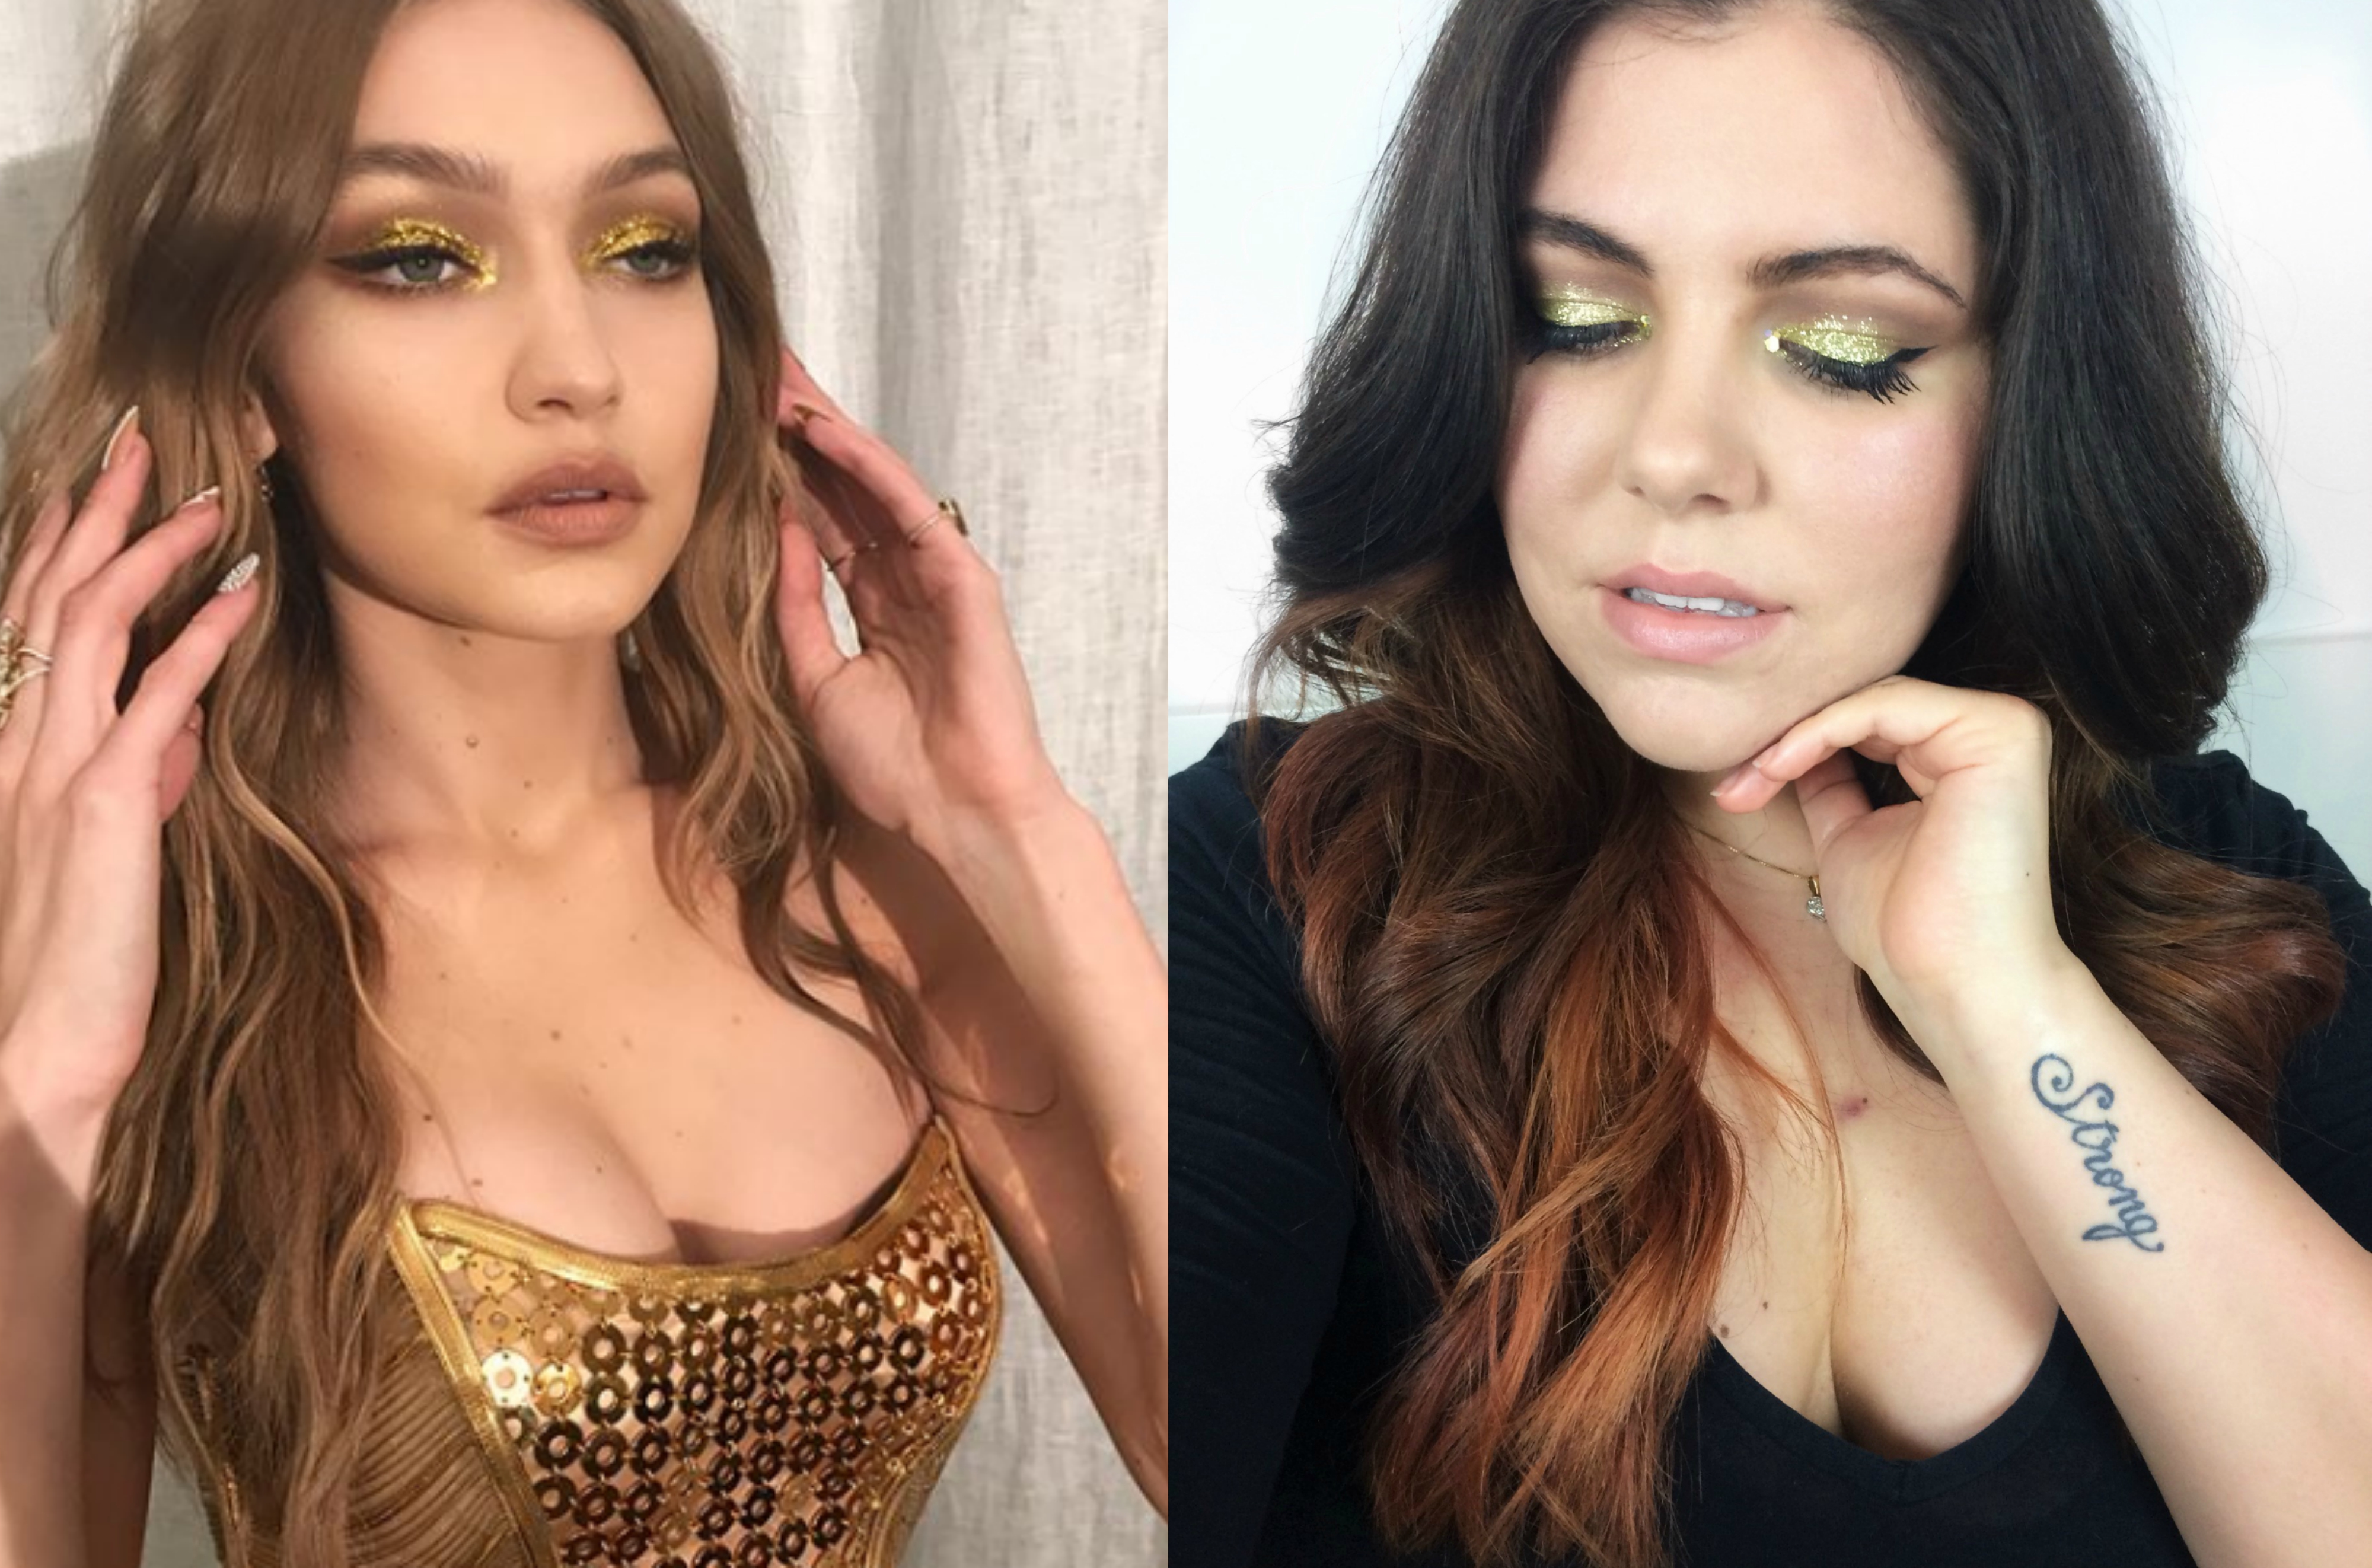 Gigi Hadid inspired look. Recreation of her birthday makeup created by Erin Parsons using Maybelline. Golden Glitter fun look #gold #glitter #holografic #makeup #gigihadid